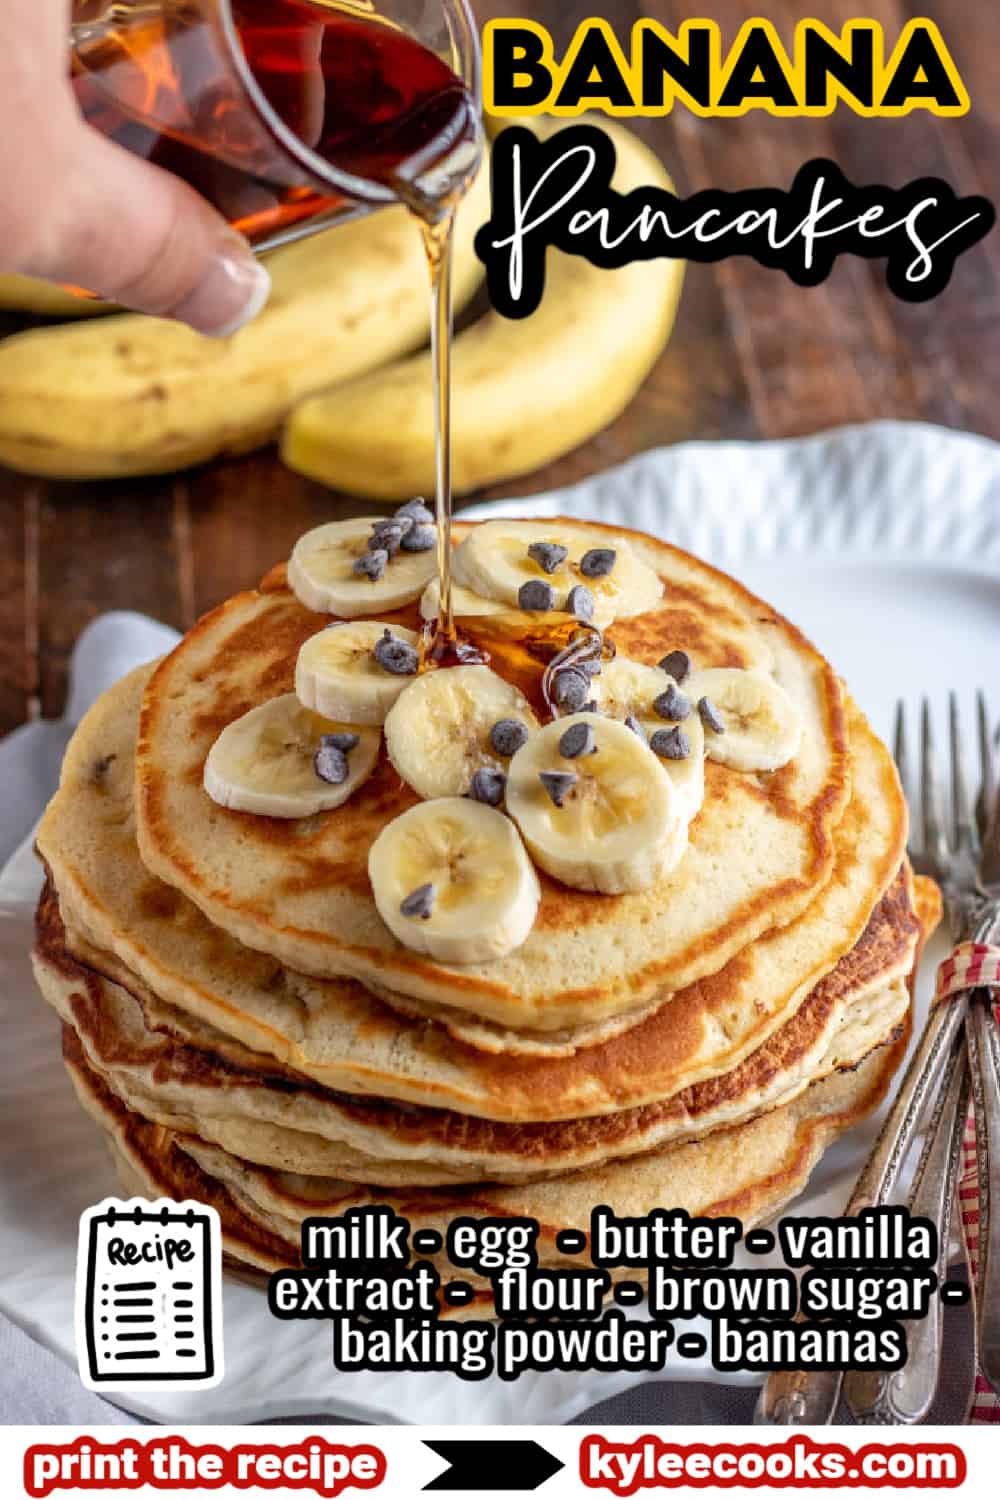 Banana pancakes on a plate with syrup being poured over, with ingredients overlaid in text.